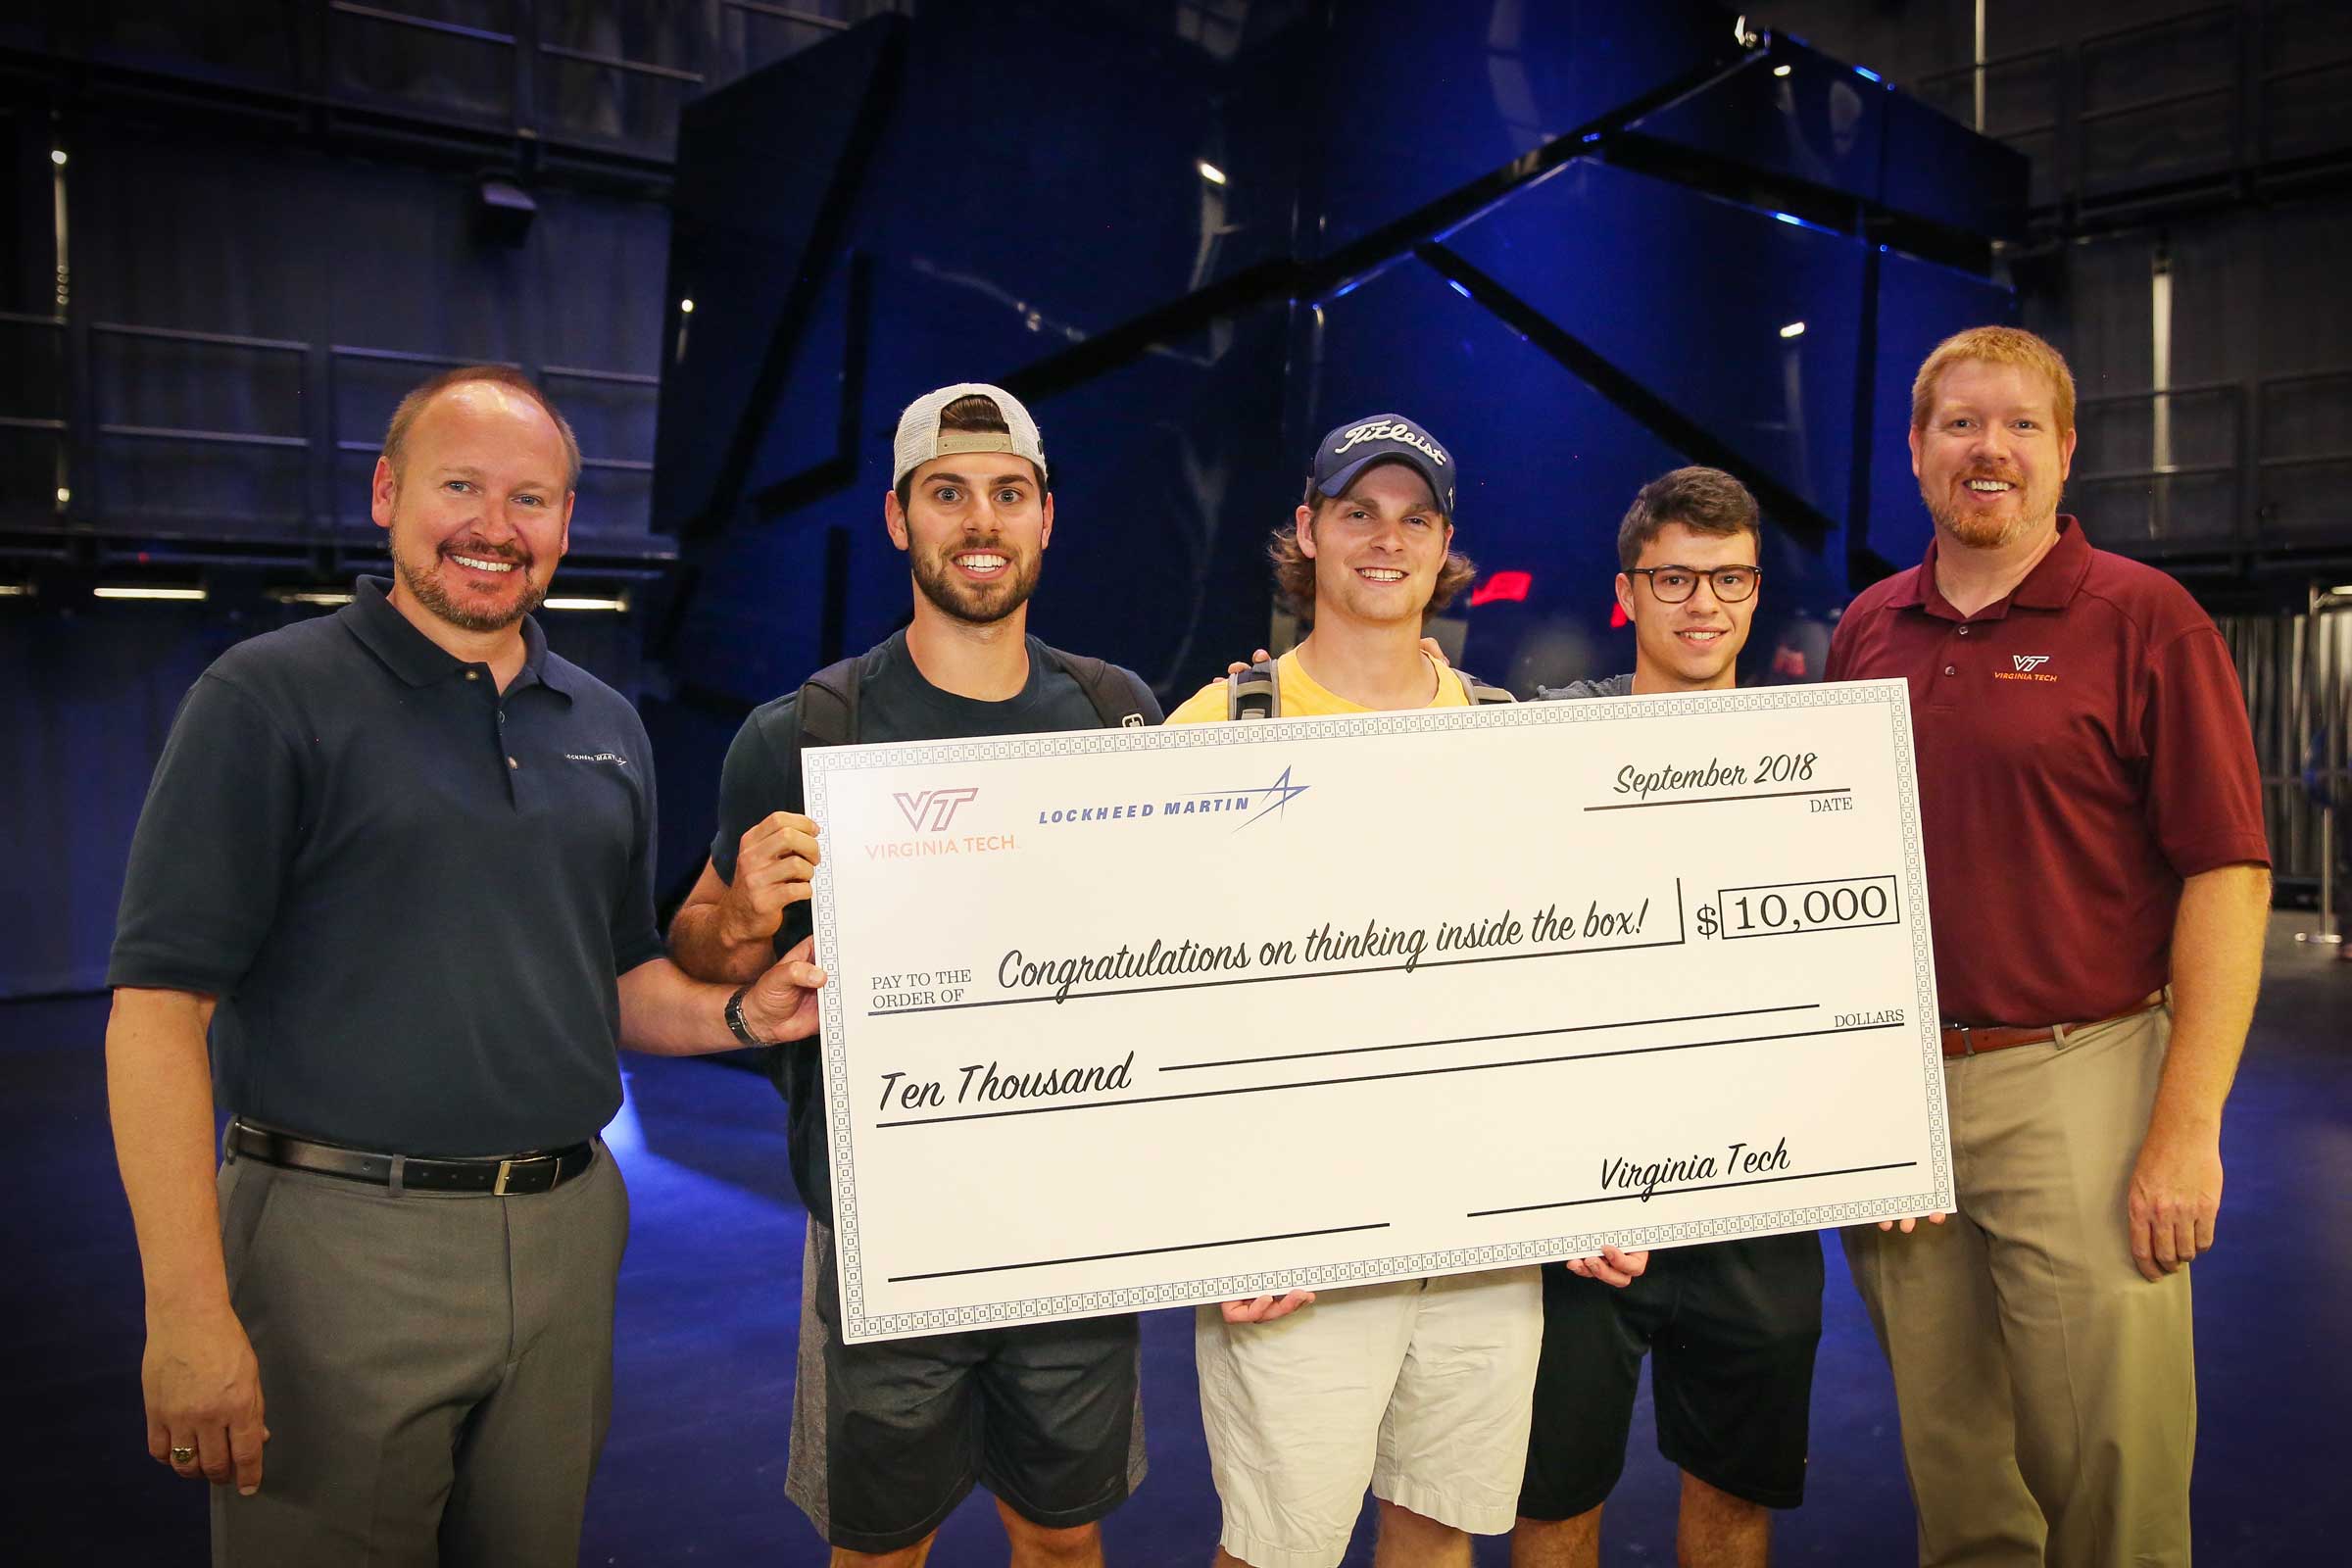 Three male, senior engineering students stand smiling holding a large check that says congratulations on thinking inside the box.